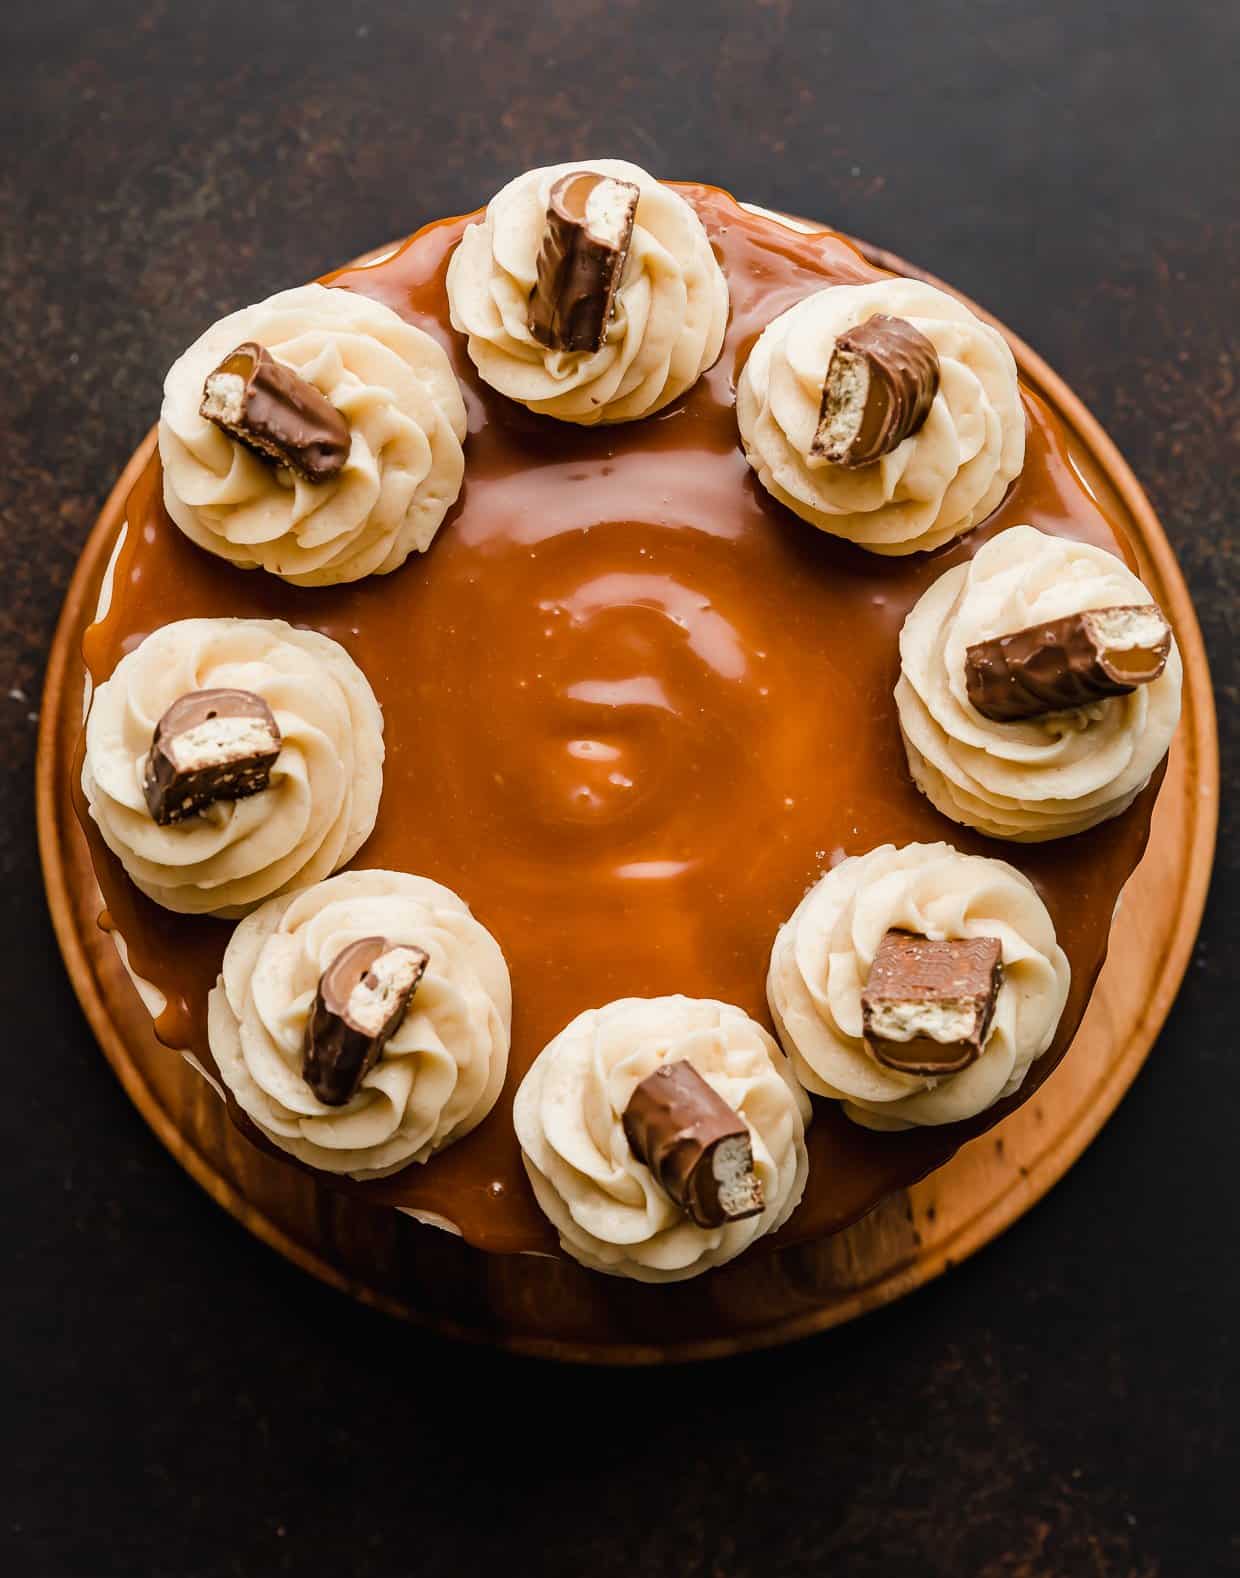 Overhead photo of a layered Twix cake topped with caramel, frosting swirls, on a brown background.